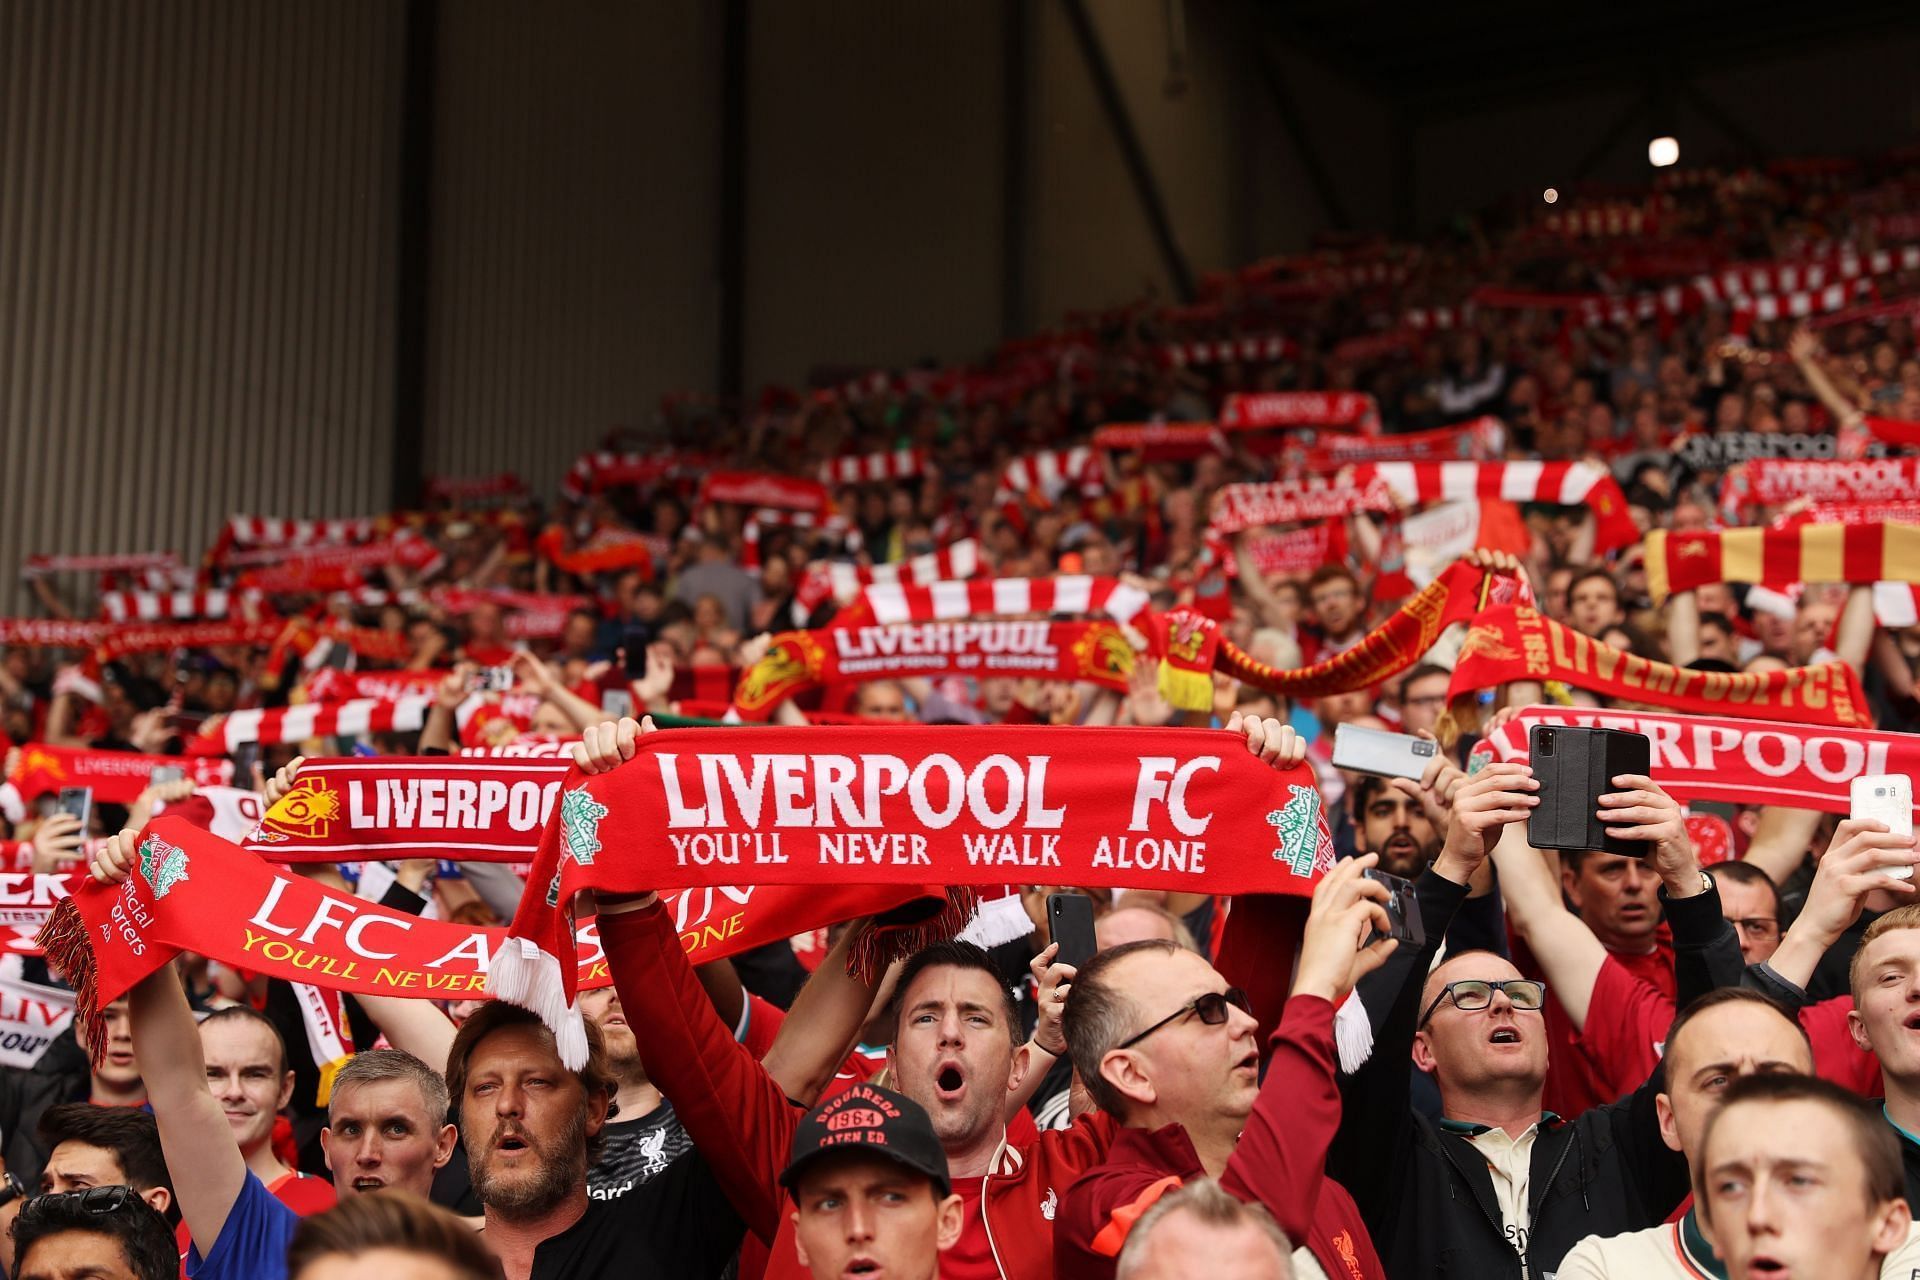 Anfield is home to the famous Kop end!